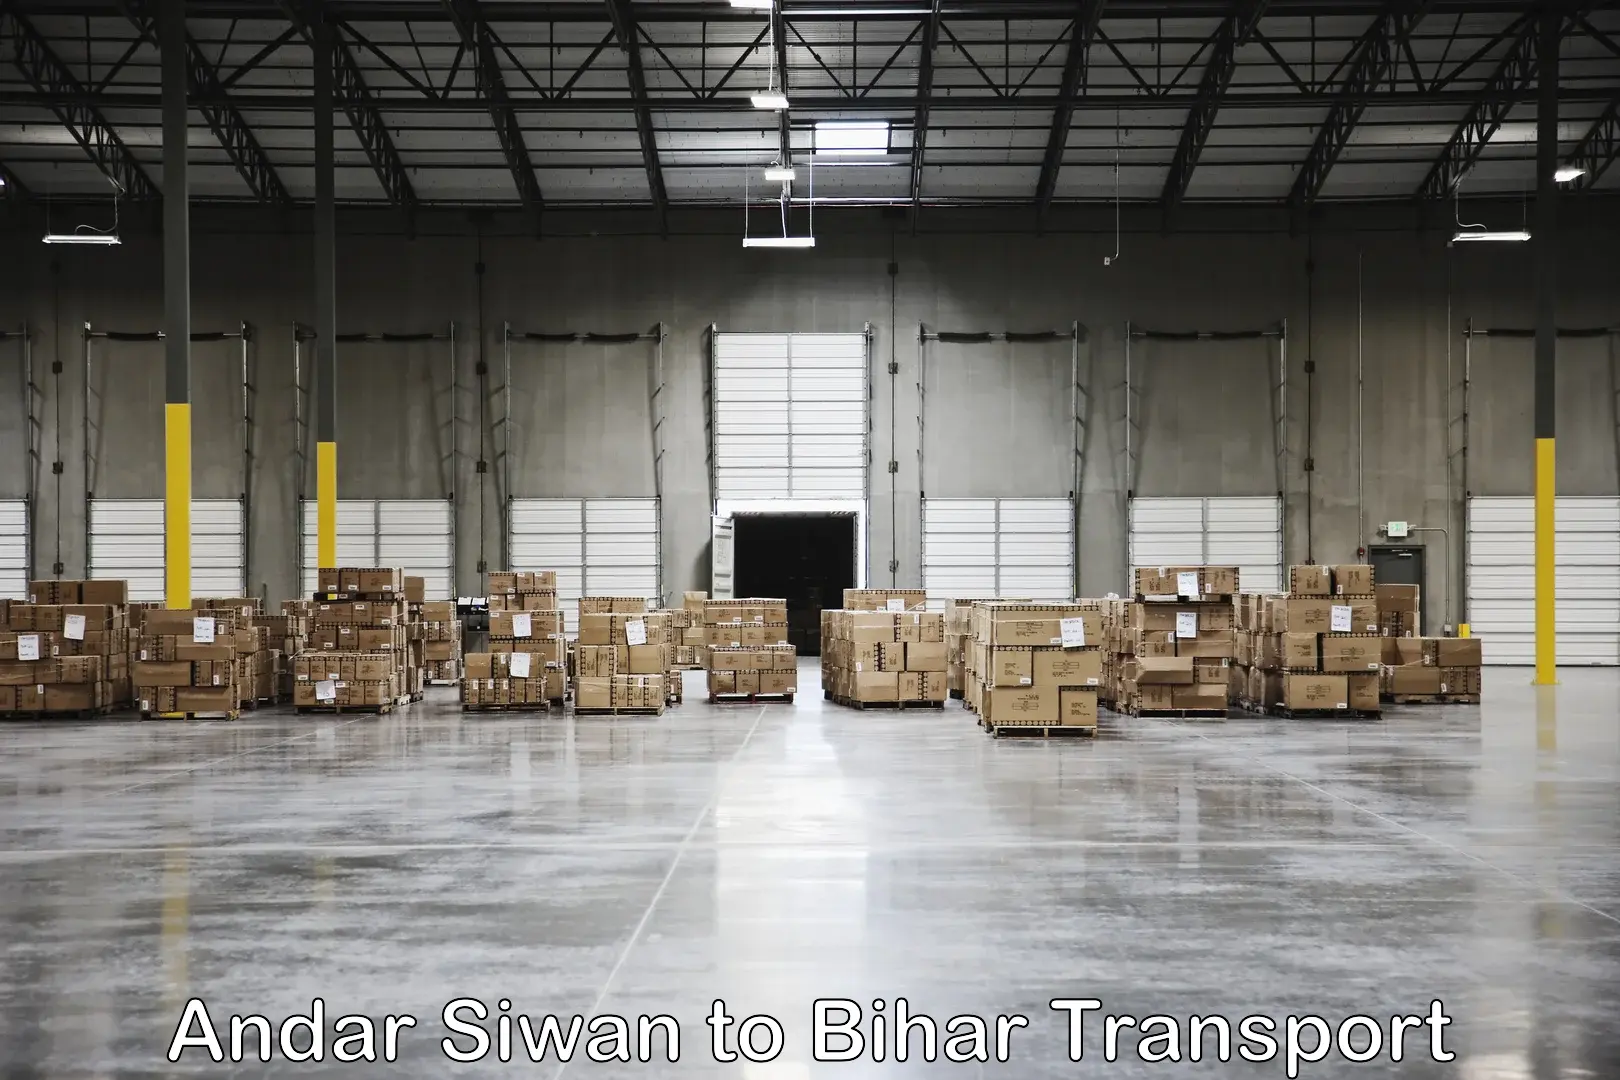 Air freight transport services Andar Siwan to Dehri